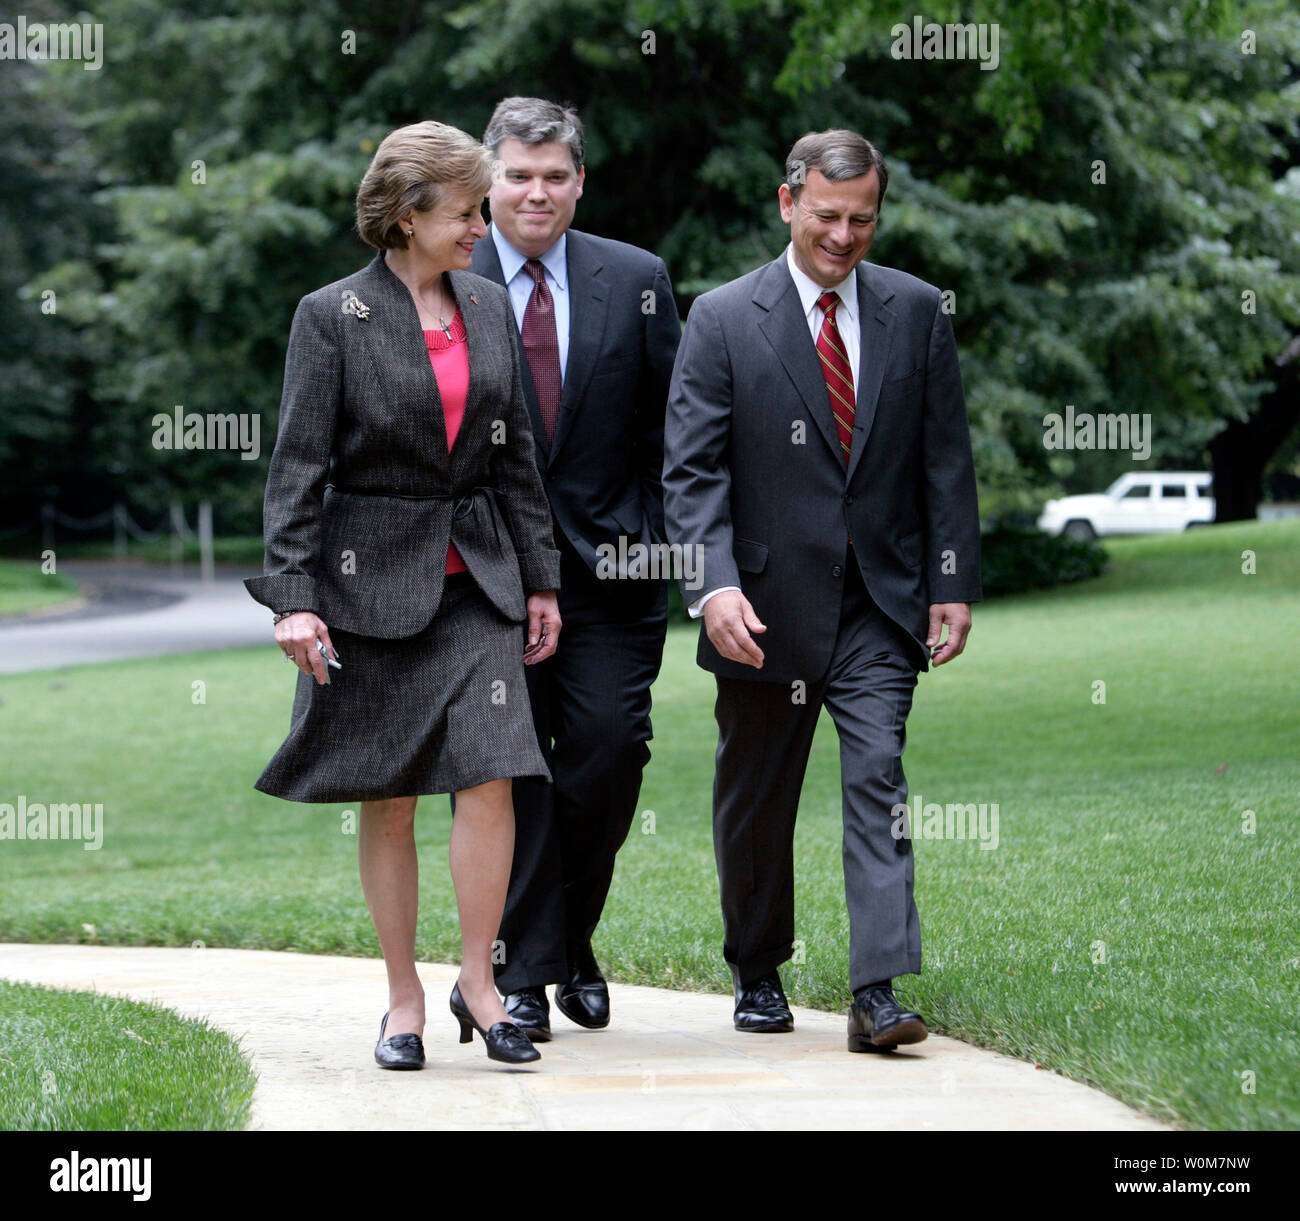 Harriet Miers escorts Supreme Court Associate Justice Nominee John G. Roberts Jr. South Lawn sidewalk en route the Oval Office to meet with President Bush on July 19, 2005 in Washington.  President Bush nominated Miers to fill Sandra Day O'Conner's seat on the Supreme Court.    (UPI Photo/Eric Draper/White House) Stock Photo